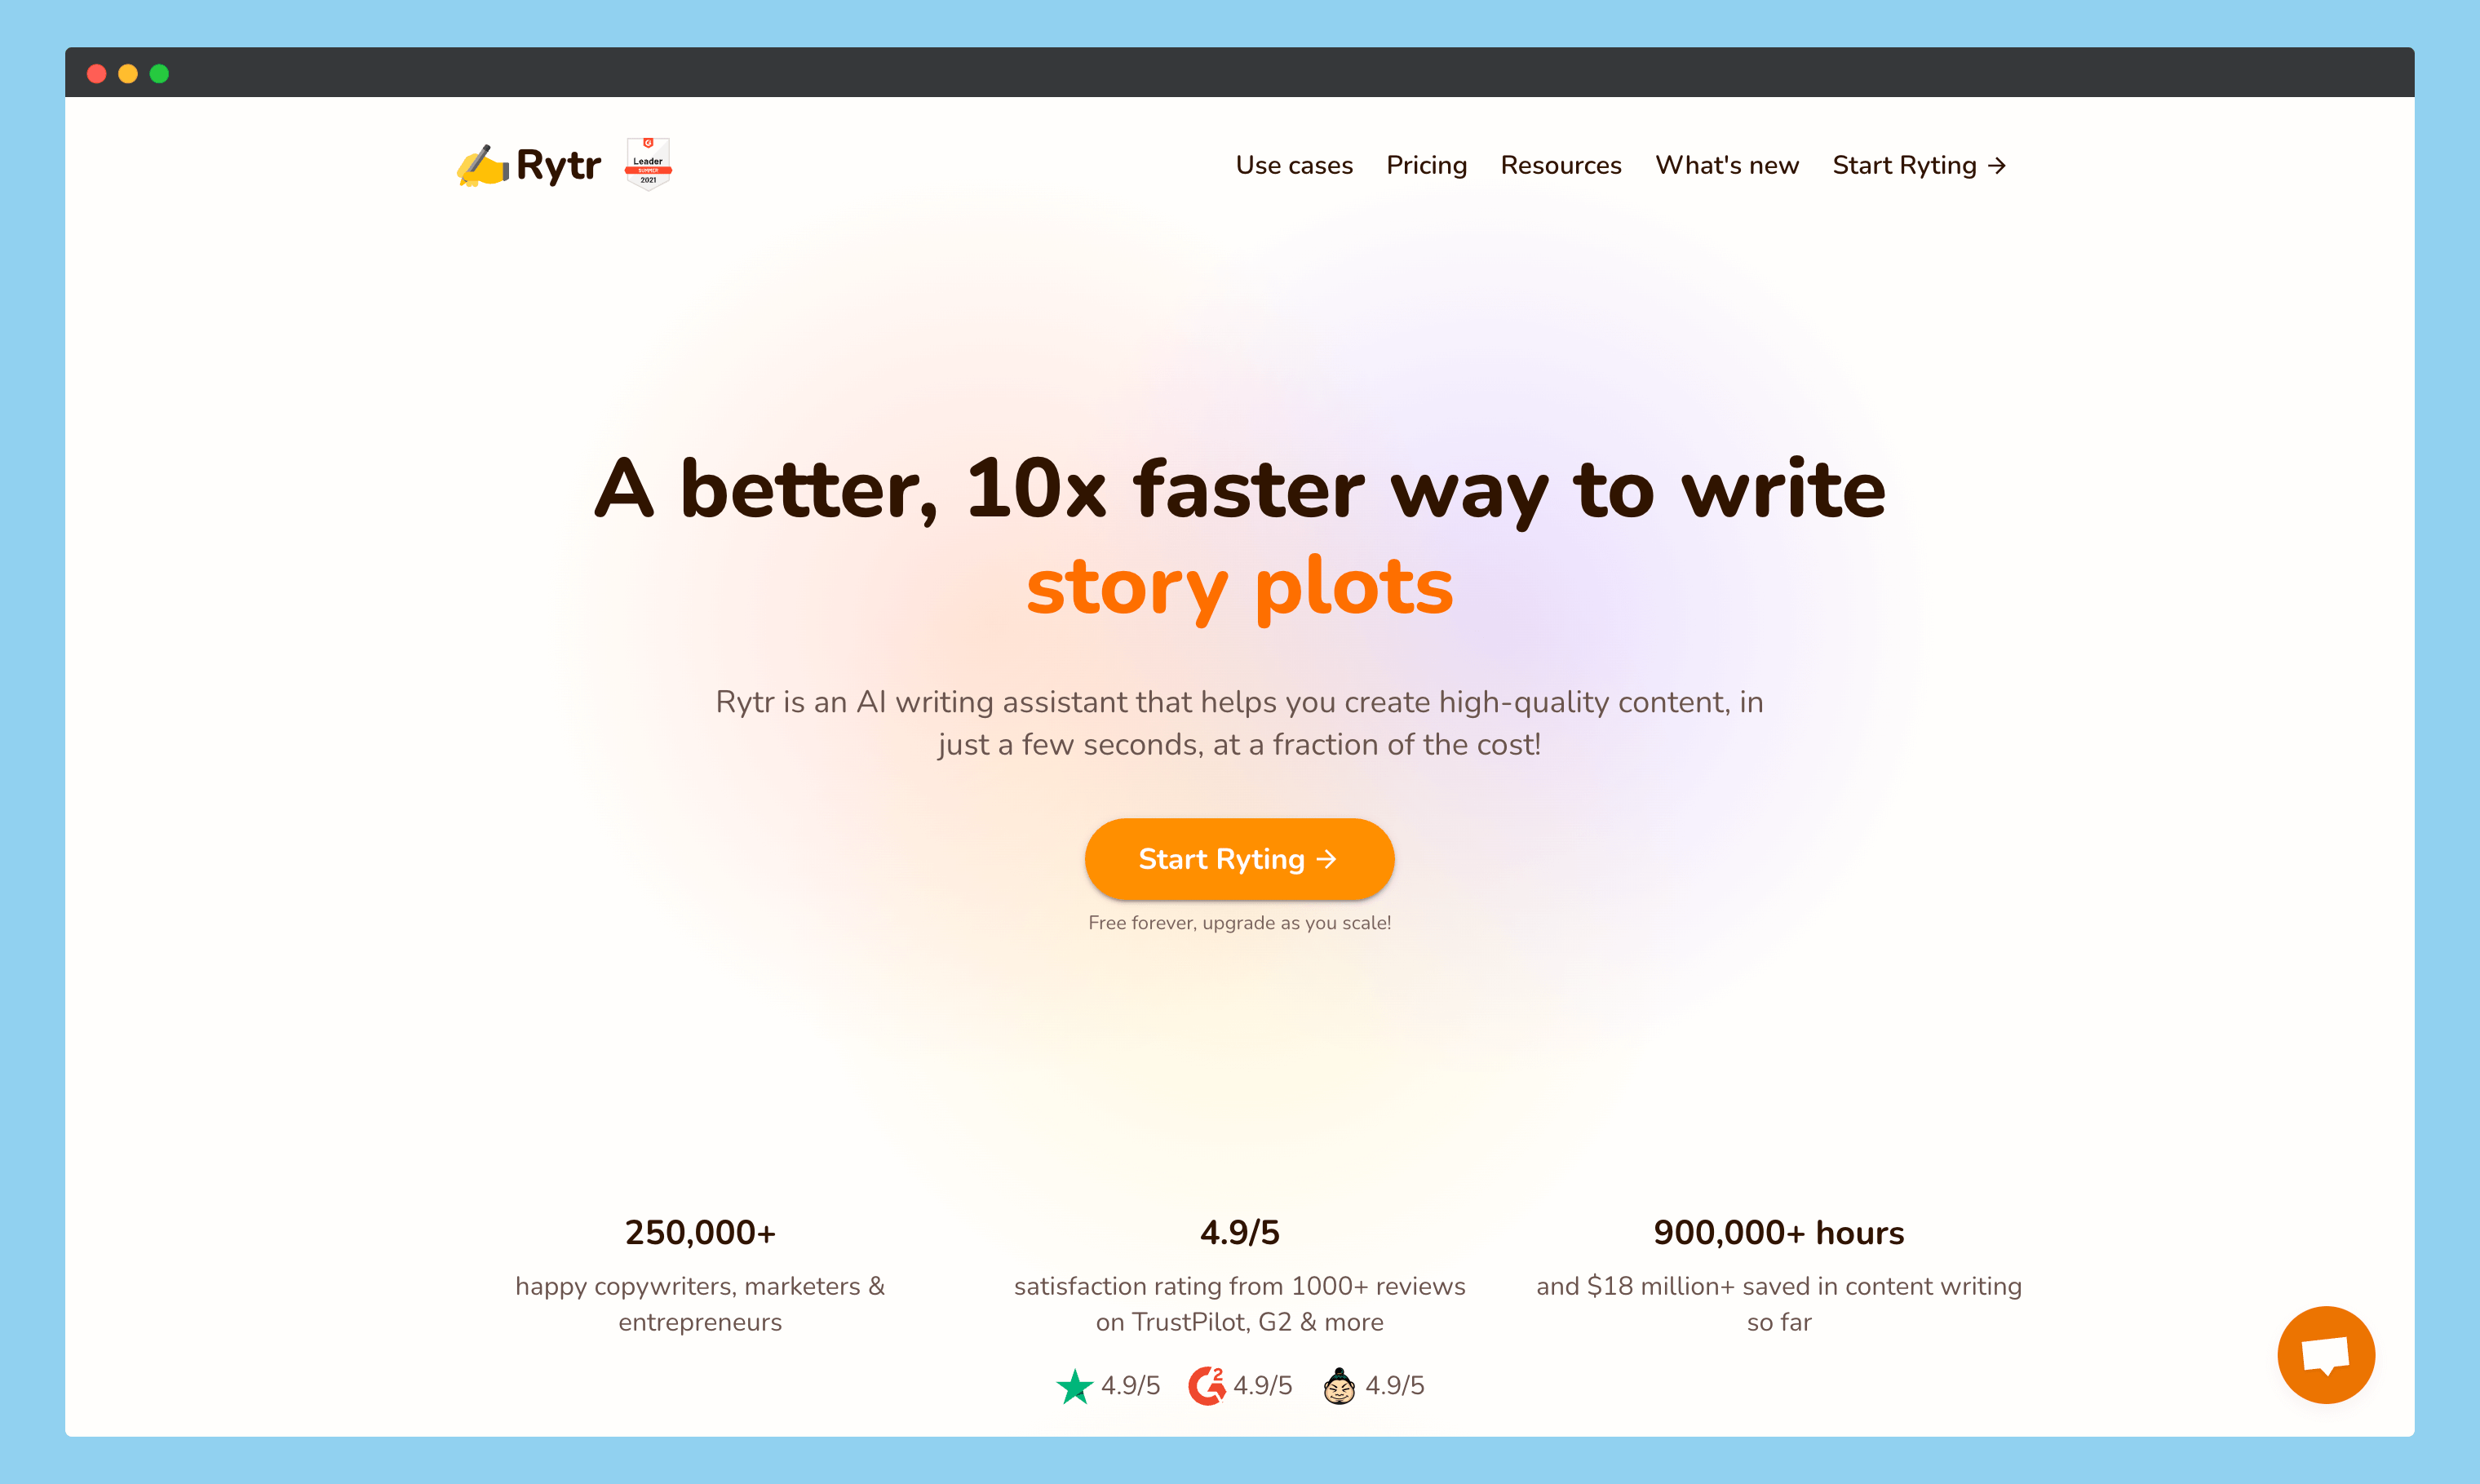 how to increase writing speed, how to write fast, how to write faster, tips to write fast, writing faster